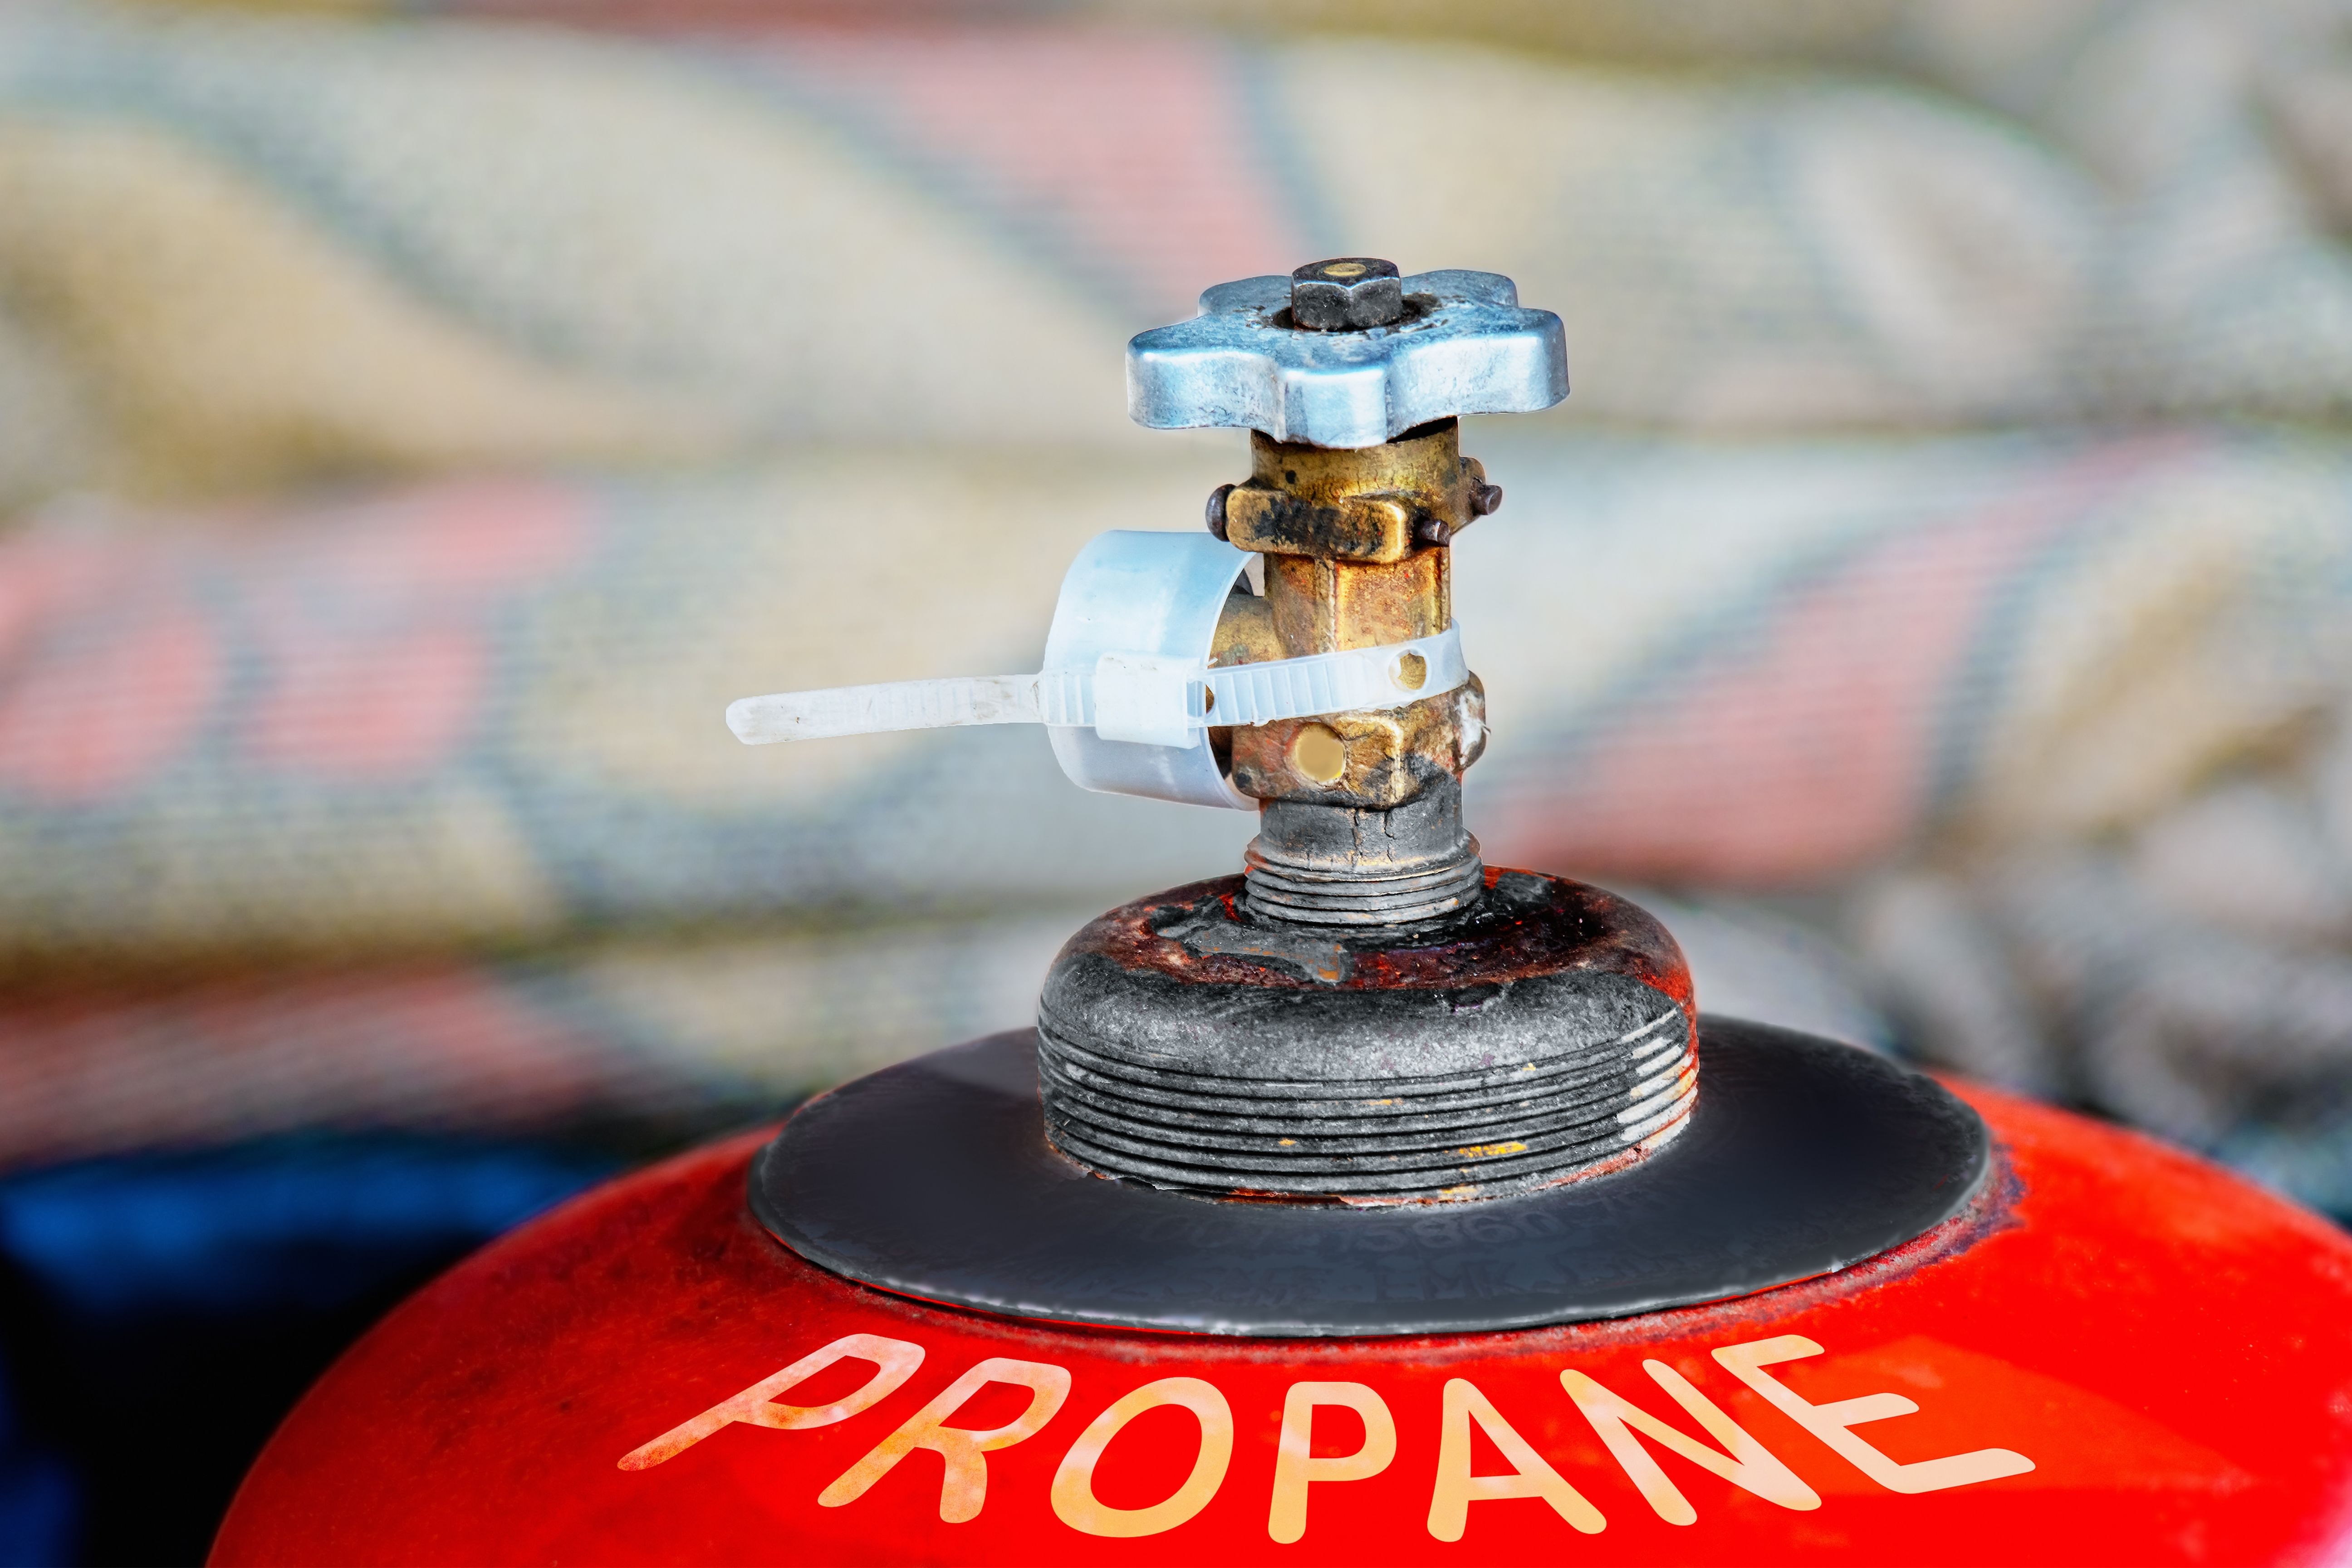 How to Remove a Propane Tank From a Gas Grill